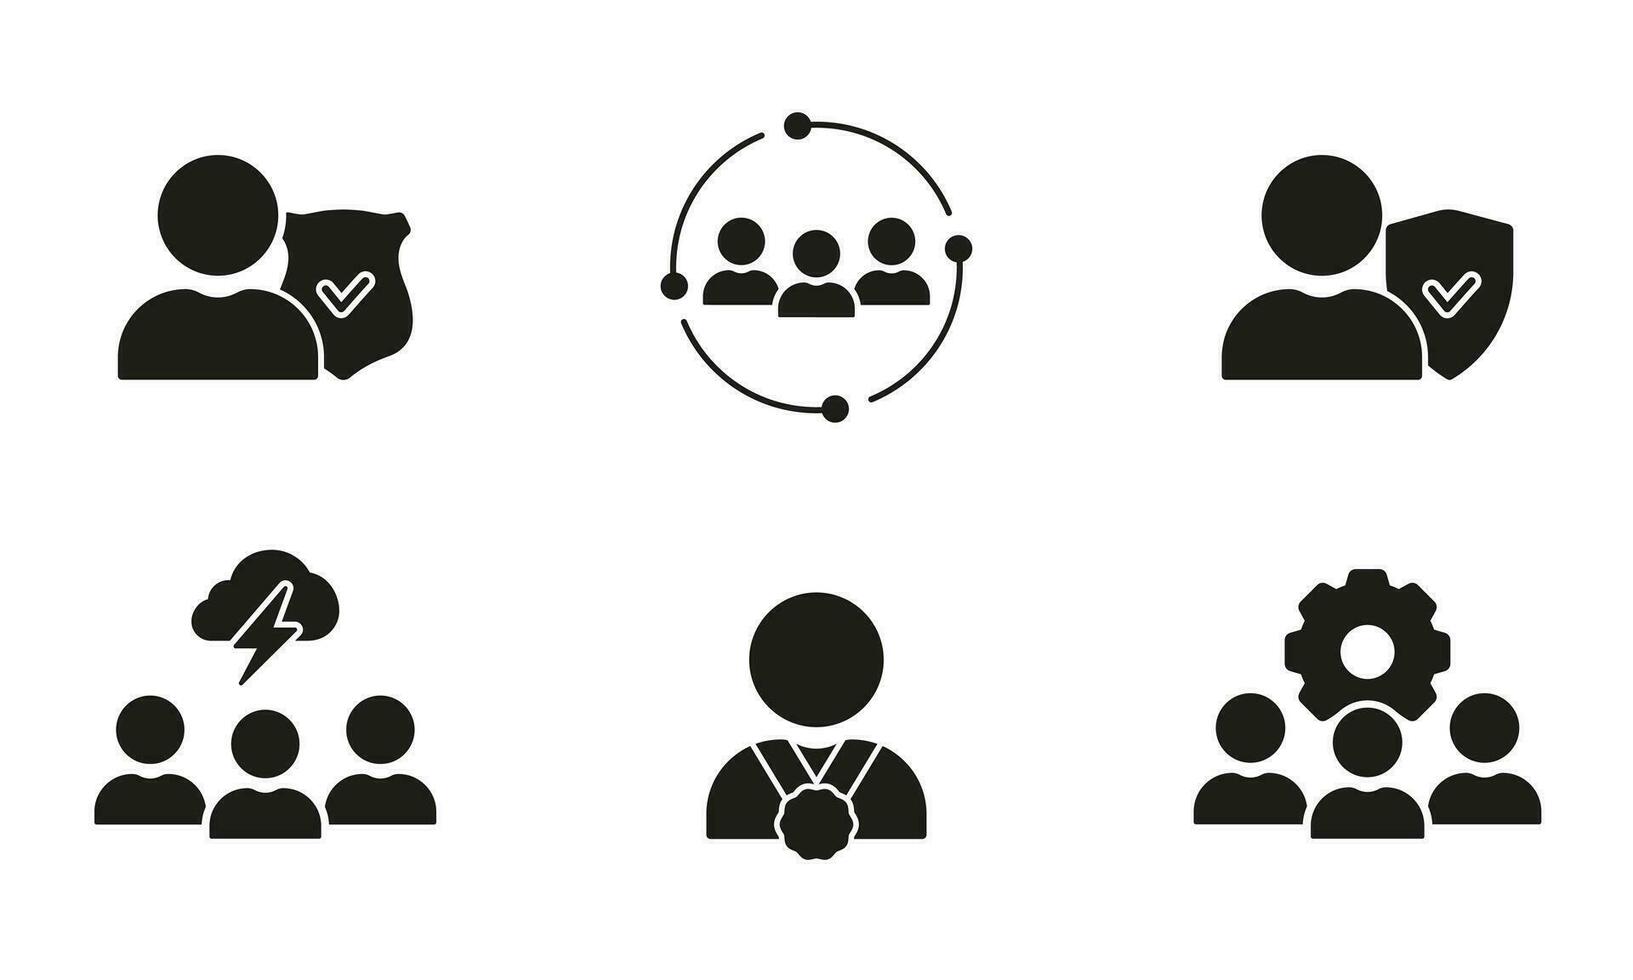 Employee Cooperation Silhouette Icons Set. Teamwork and Brainstorm Glyph Pictogram Collection. Social Protection Solid Sign. Business Management Symbol. Team Partnership. Isolated Vector Illustration.